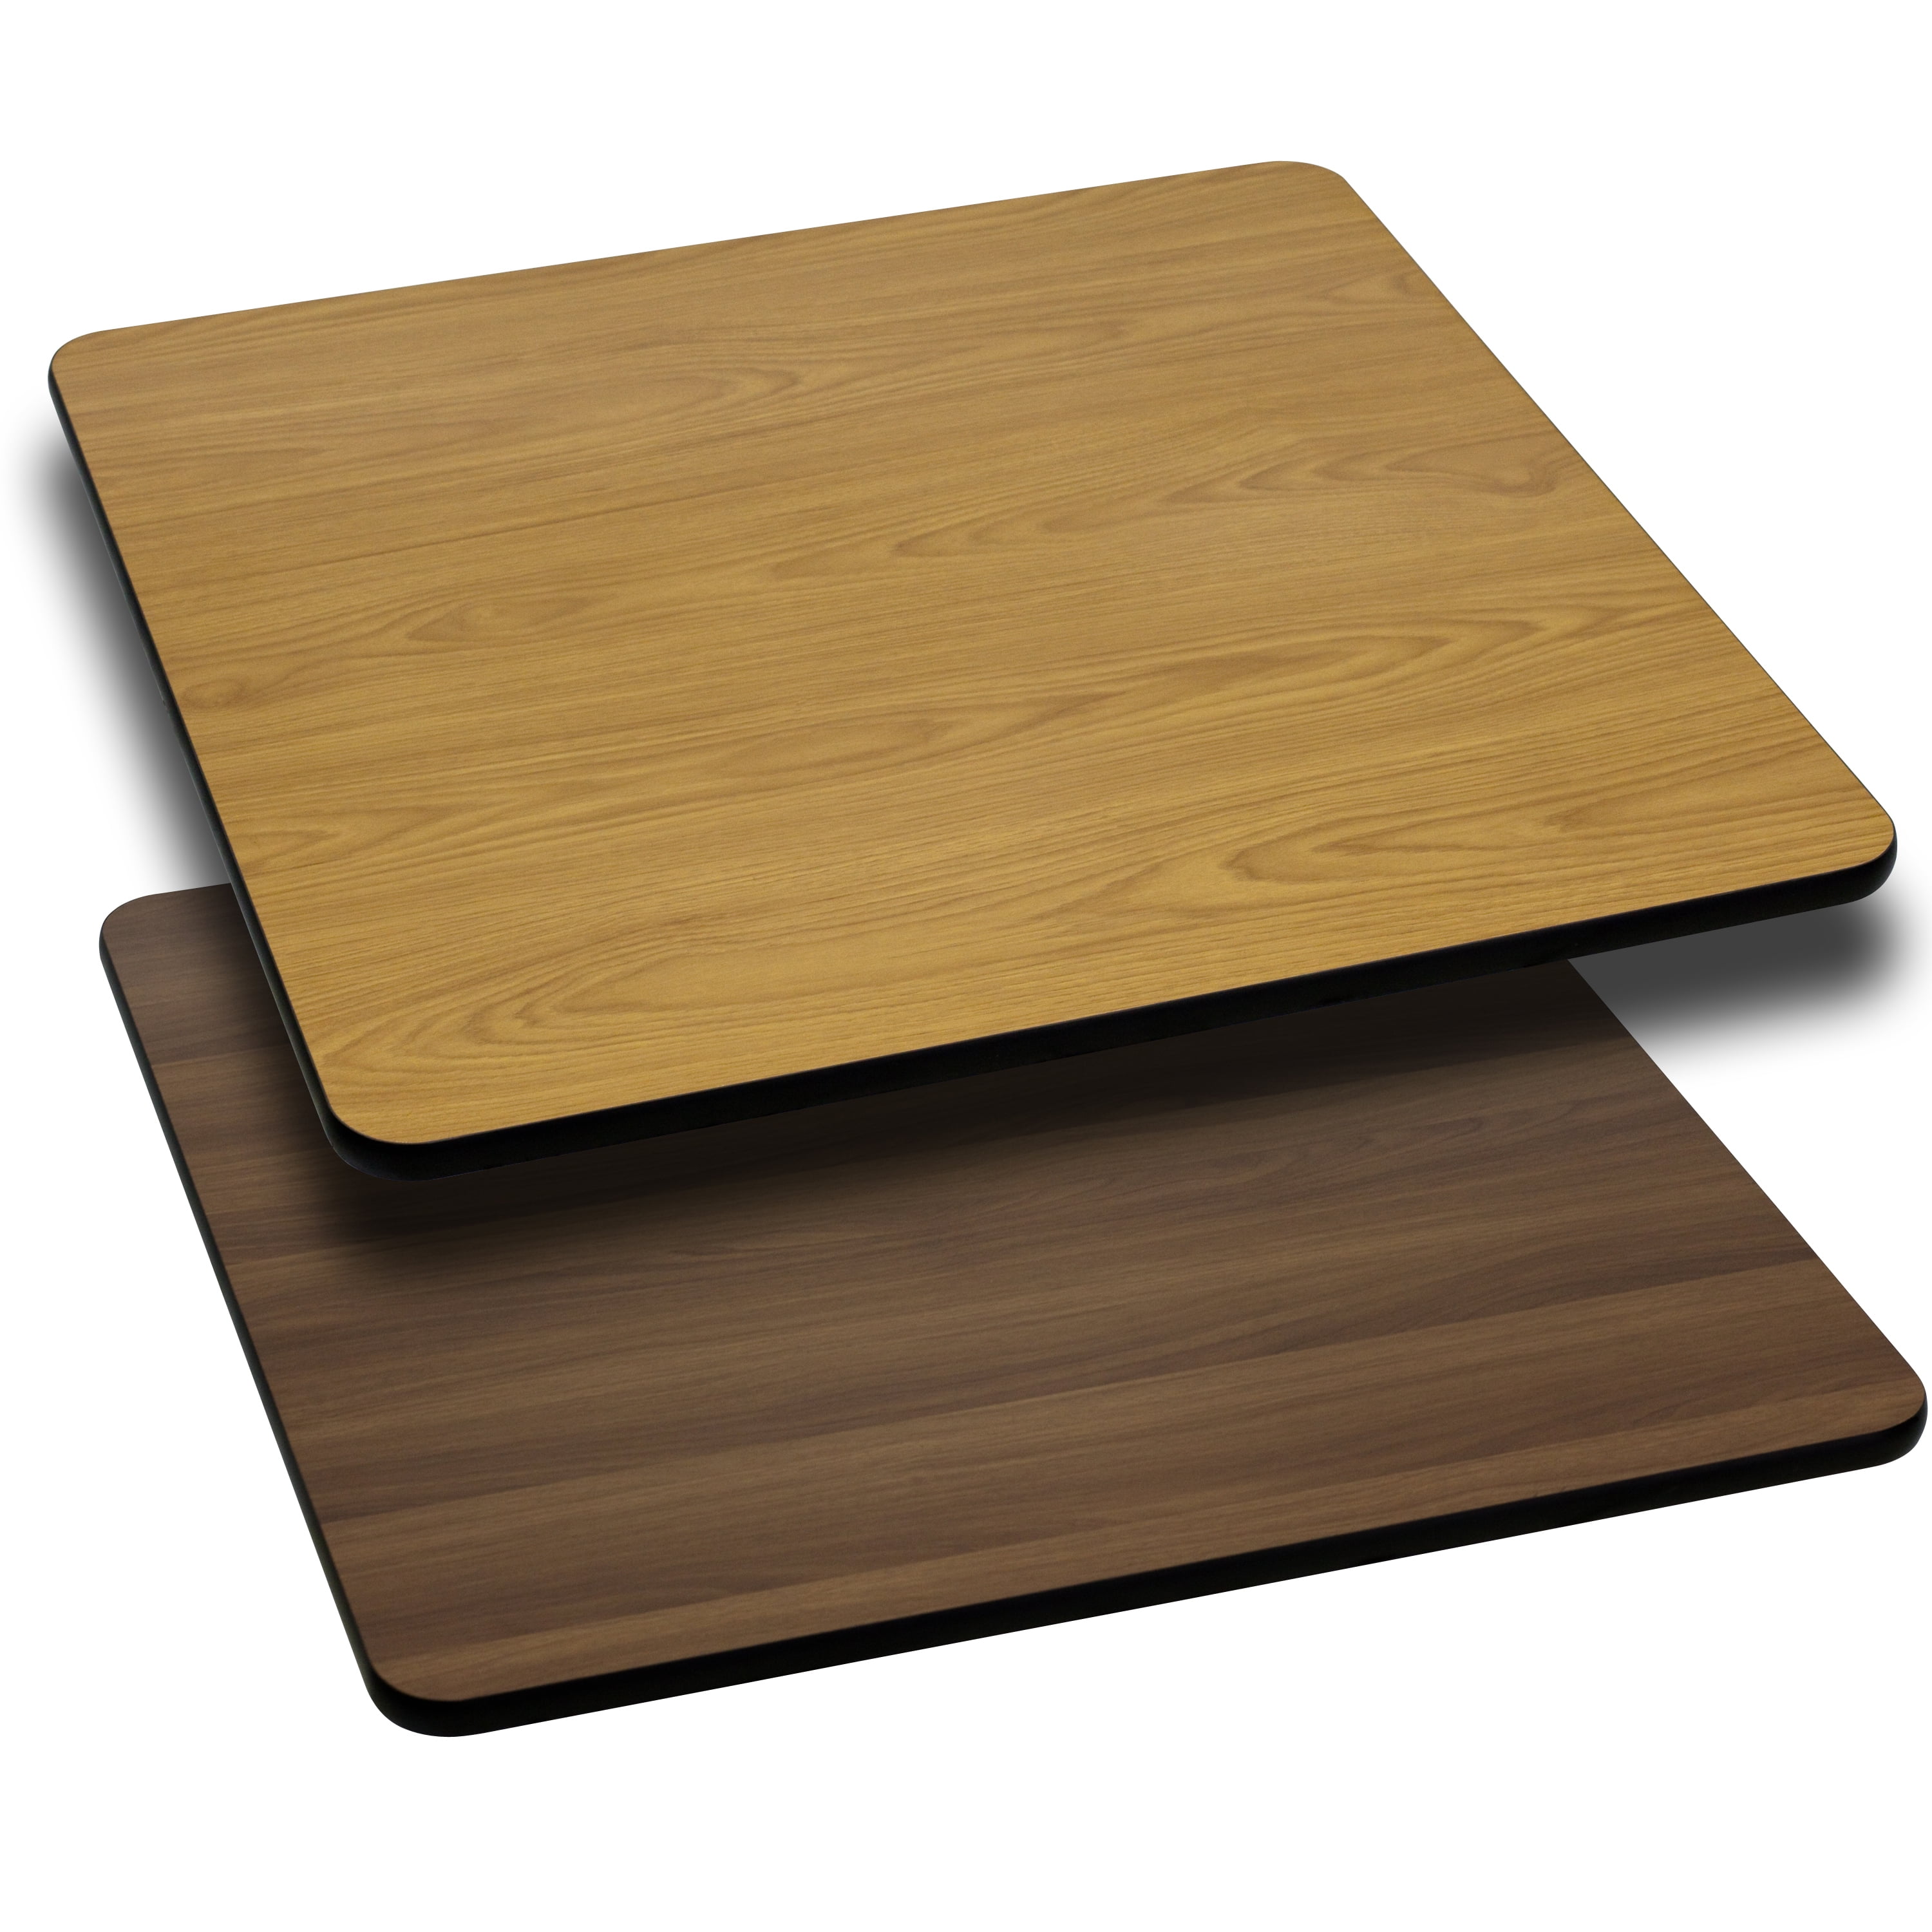 Flash Furniture 36'' Round Two-tone Resin Cherry and Mahogany Table Top for sale online 